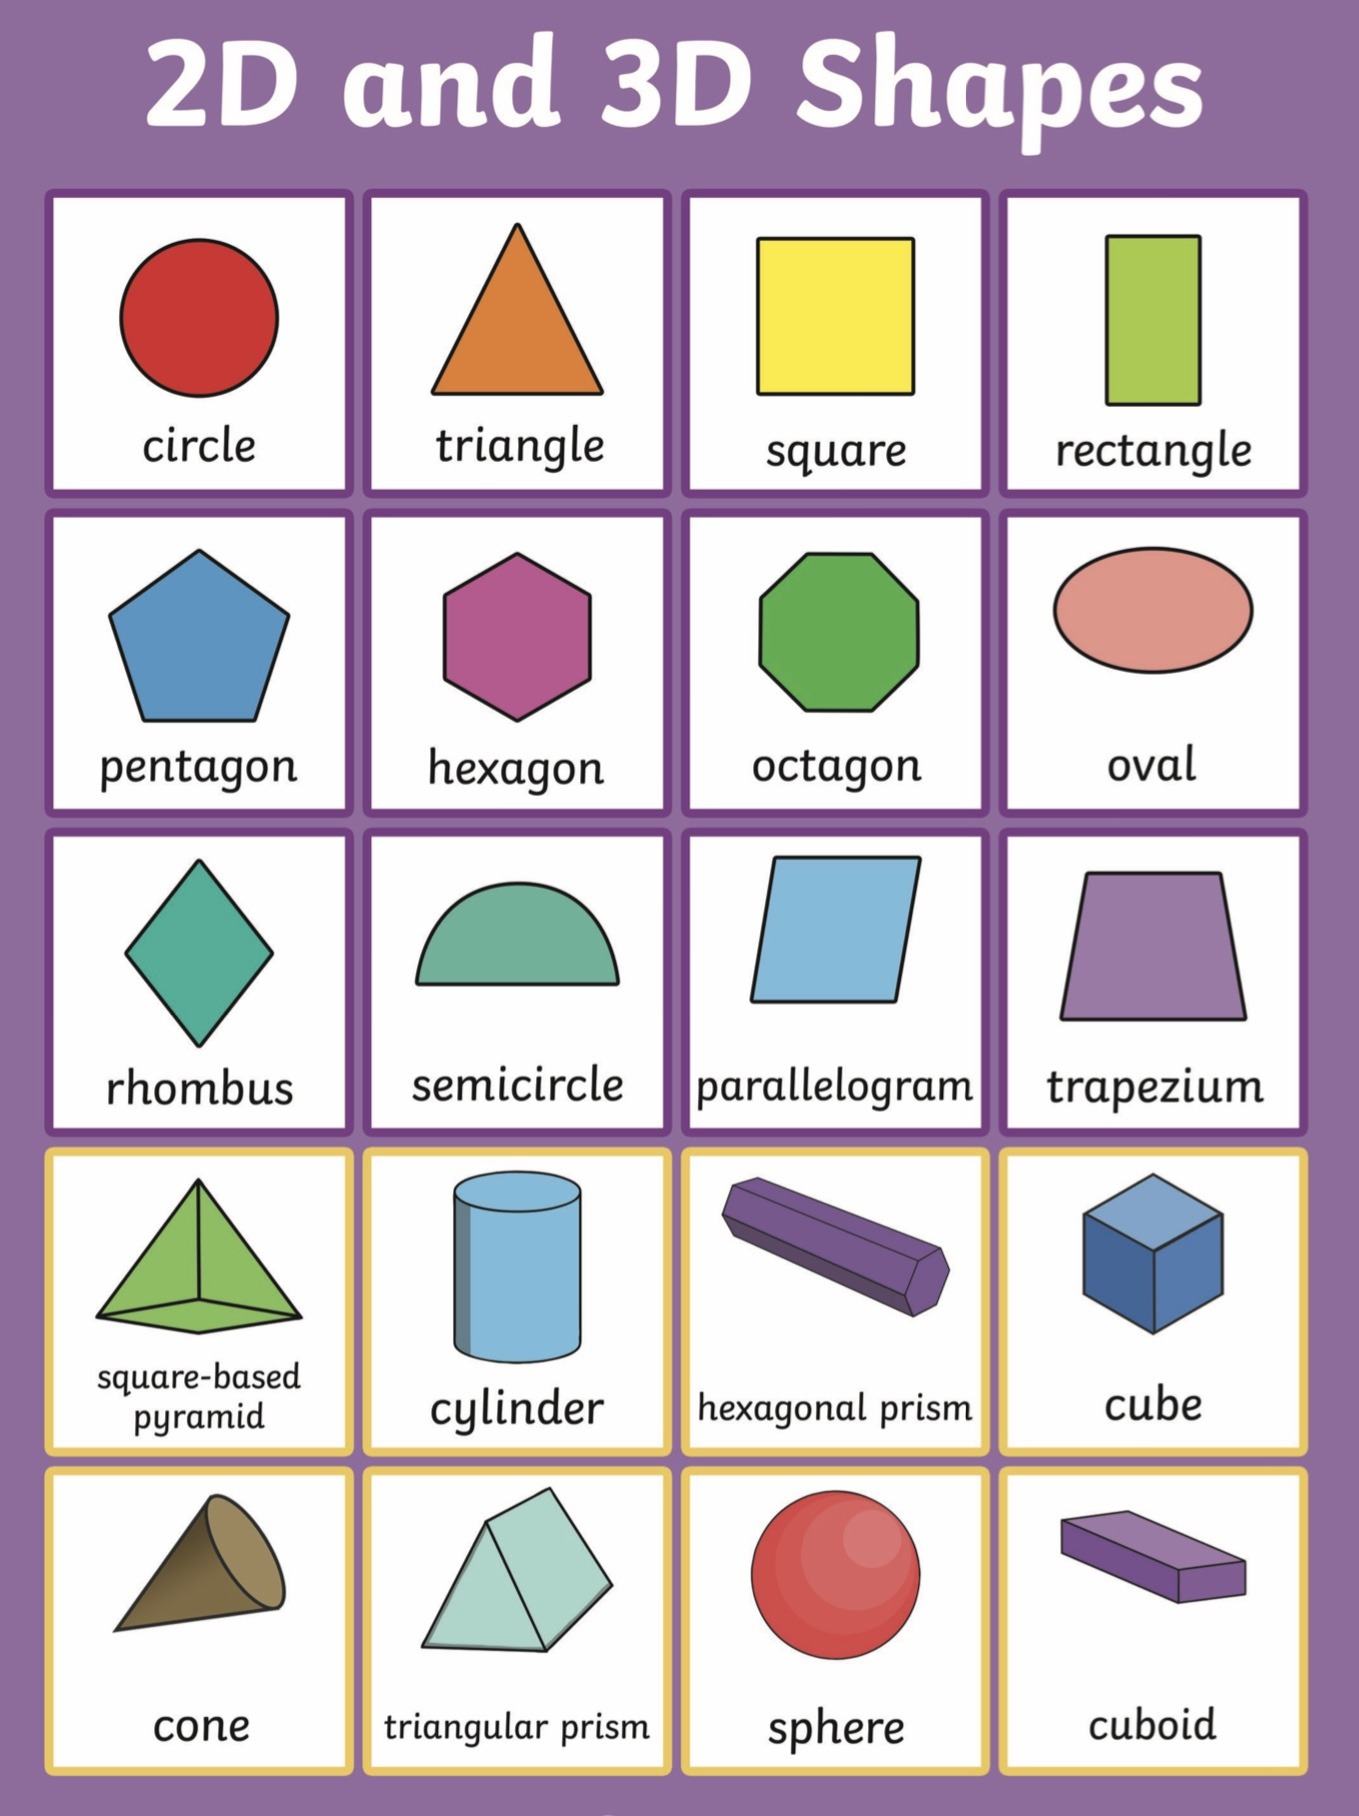 2d-and-3d-shapes-which-is-differences-to-learn